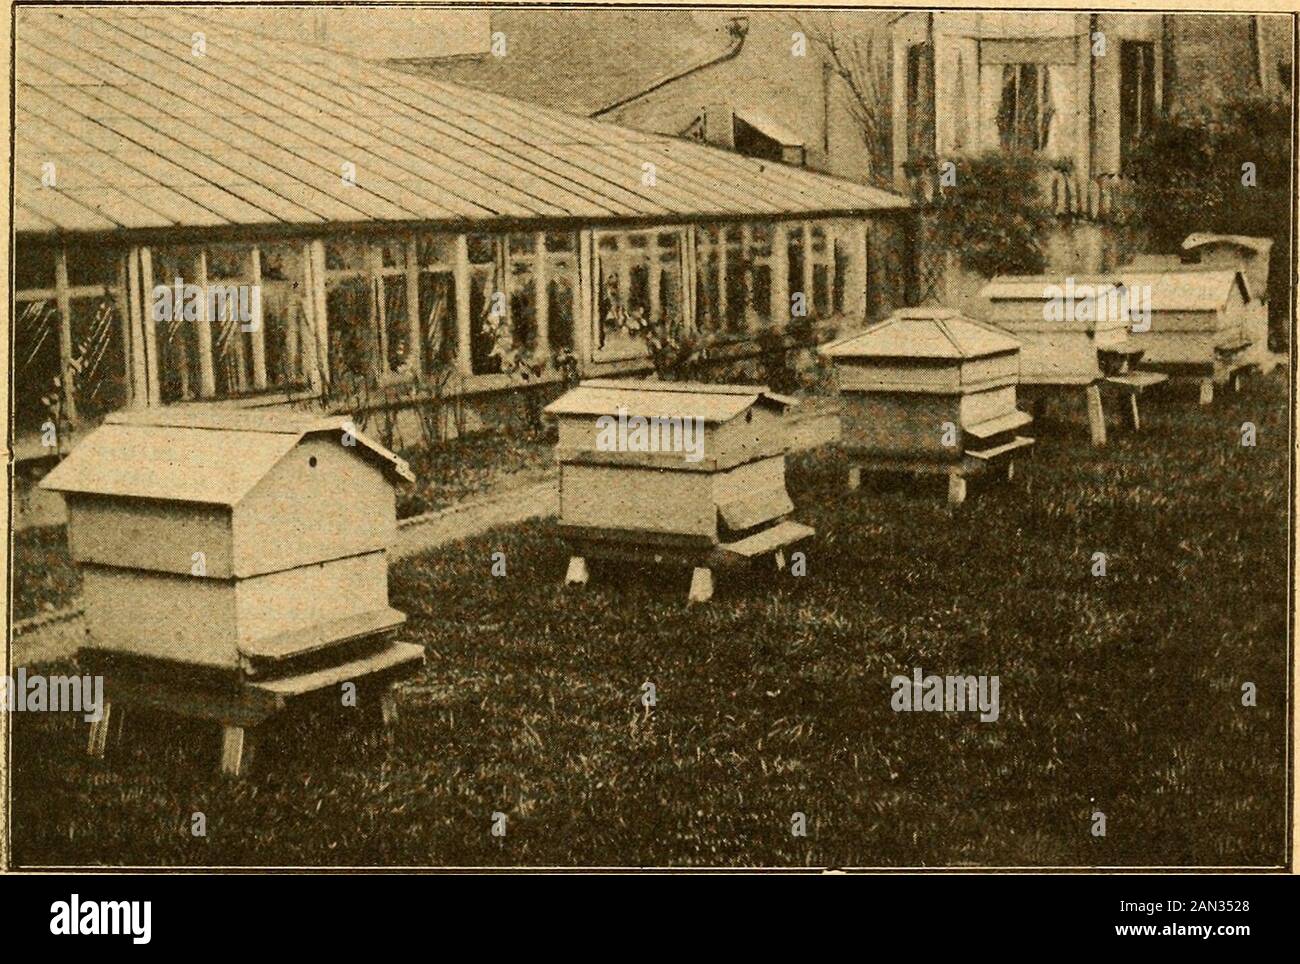 British bee journal & bee-keepers adviser . rseryman whose apiary has been illus-trated, and we gladly welcome as a readerone who follows a line of business believedby some to be injured more or less by beesentering their greenhouses and doingdamage therein by their visits to bloomsfor the purpose of pollen-gathering, etc.His own experience as a bee-keeper is in-teresting, and needs no addition from us.He says : — br.ard laid in front of the prepared framehive, and the manner in which the littlecreatures all faced right about, andmarched like drilled soldiers into the? new Jiouse was a sight o Stock Photo